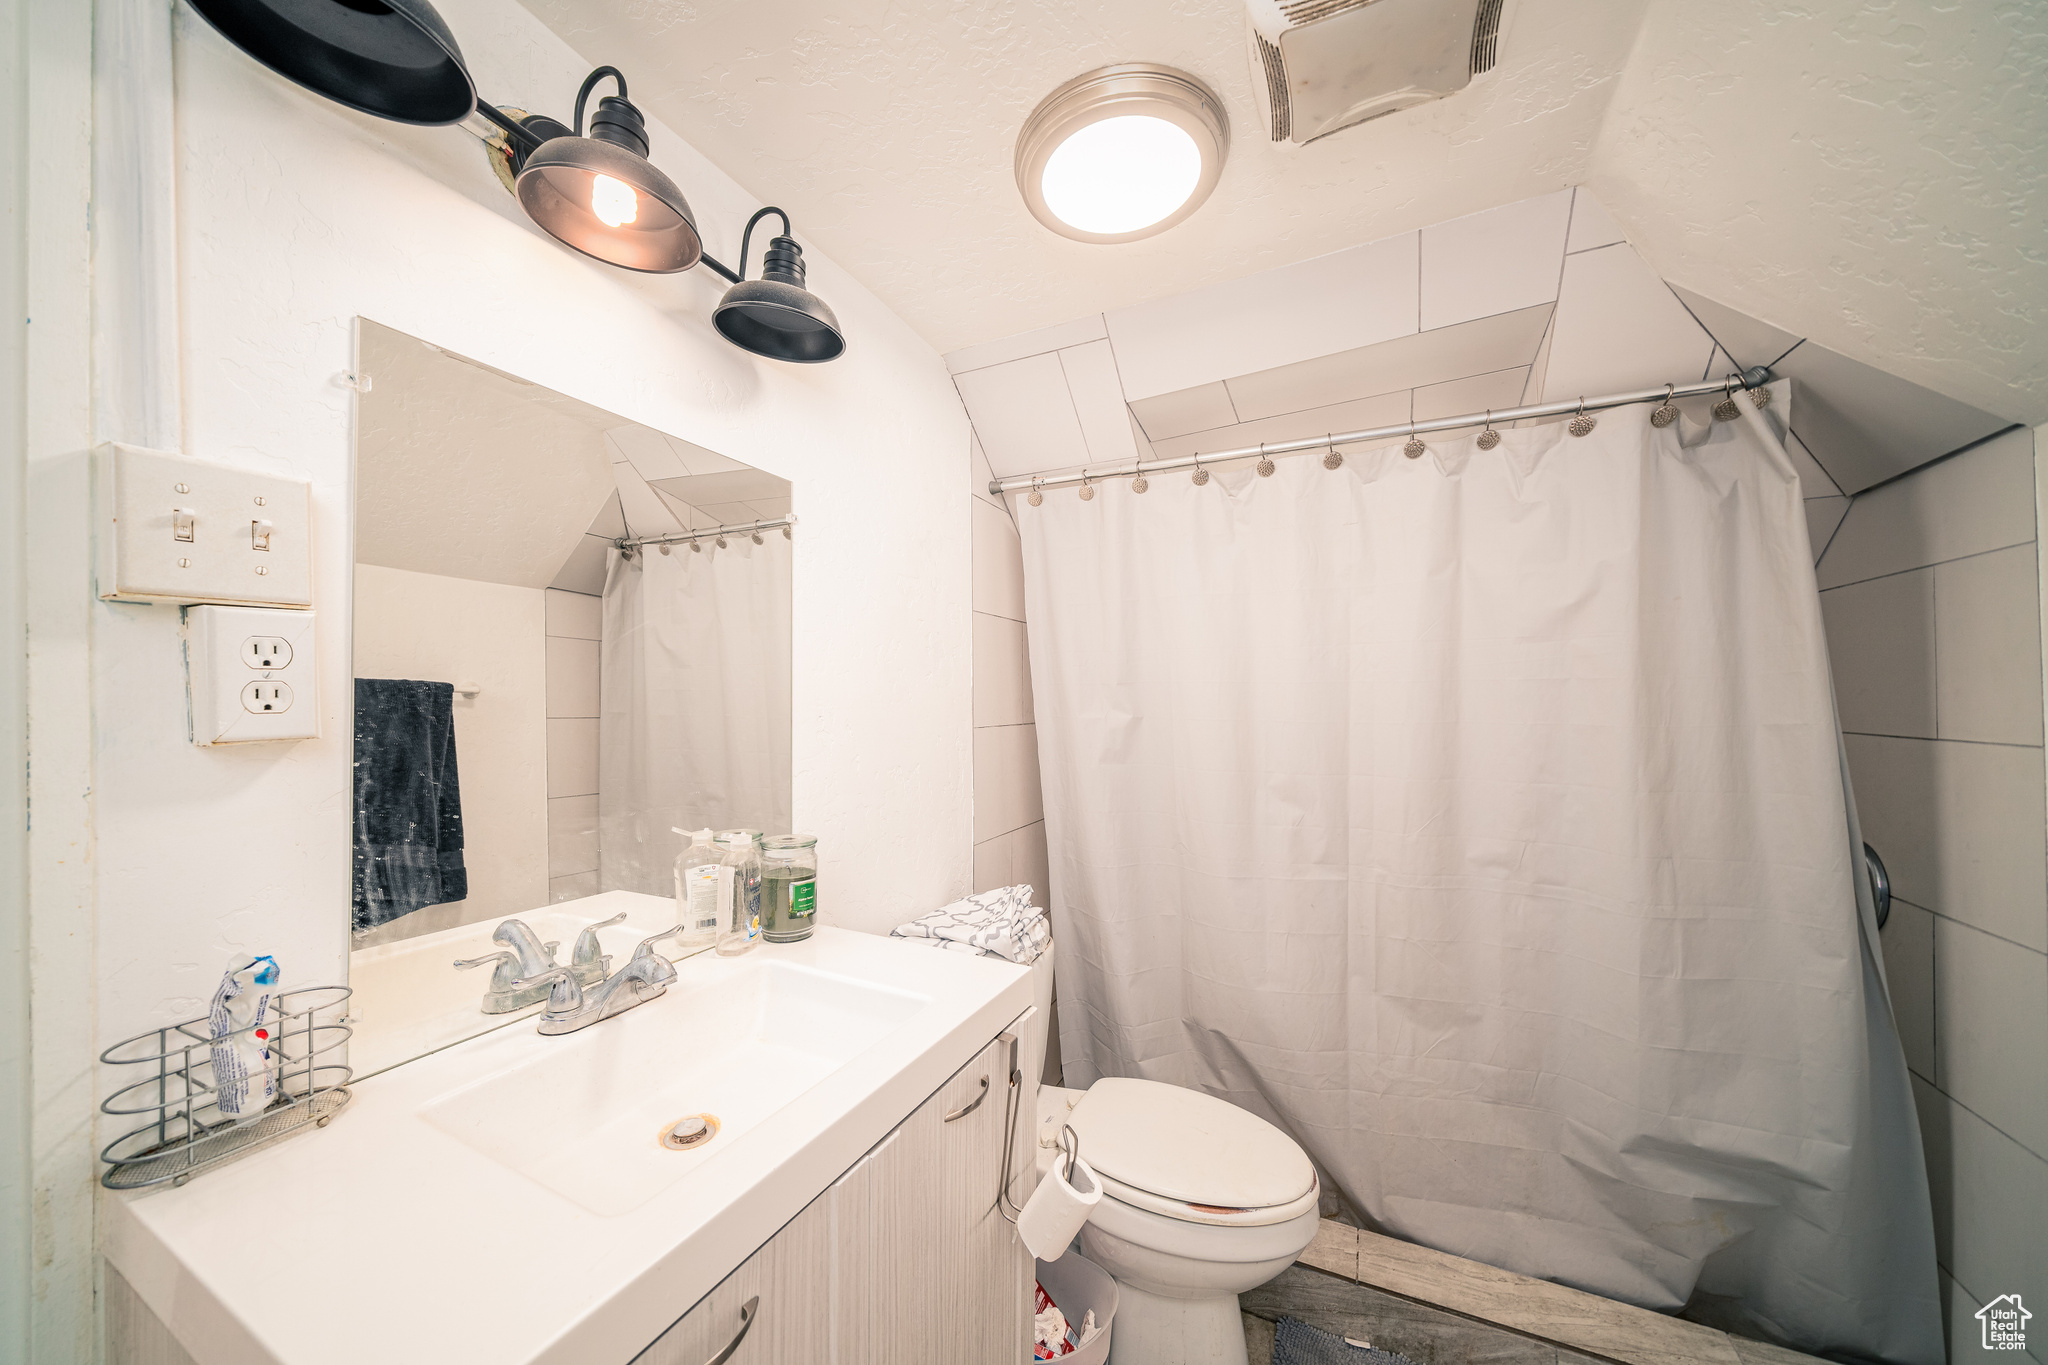 Bathroom with toilet, vanity, and vaulted ceiling